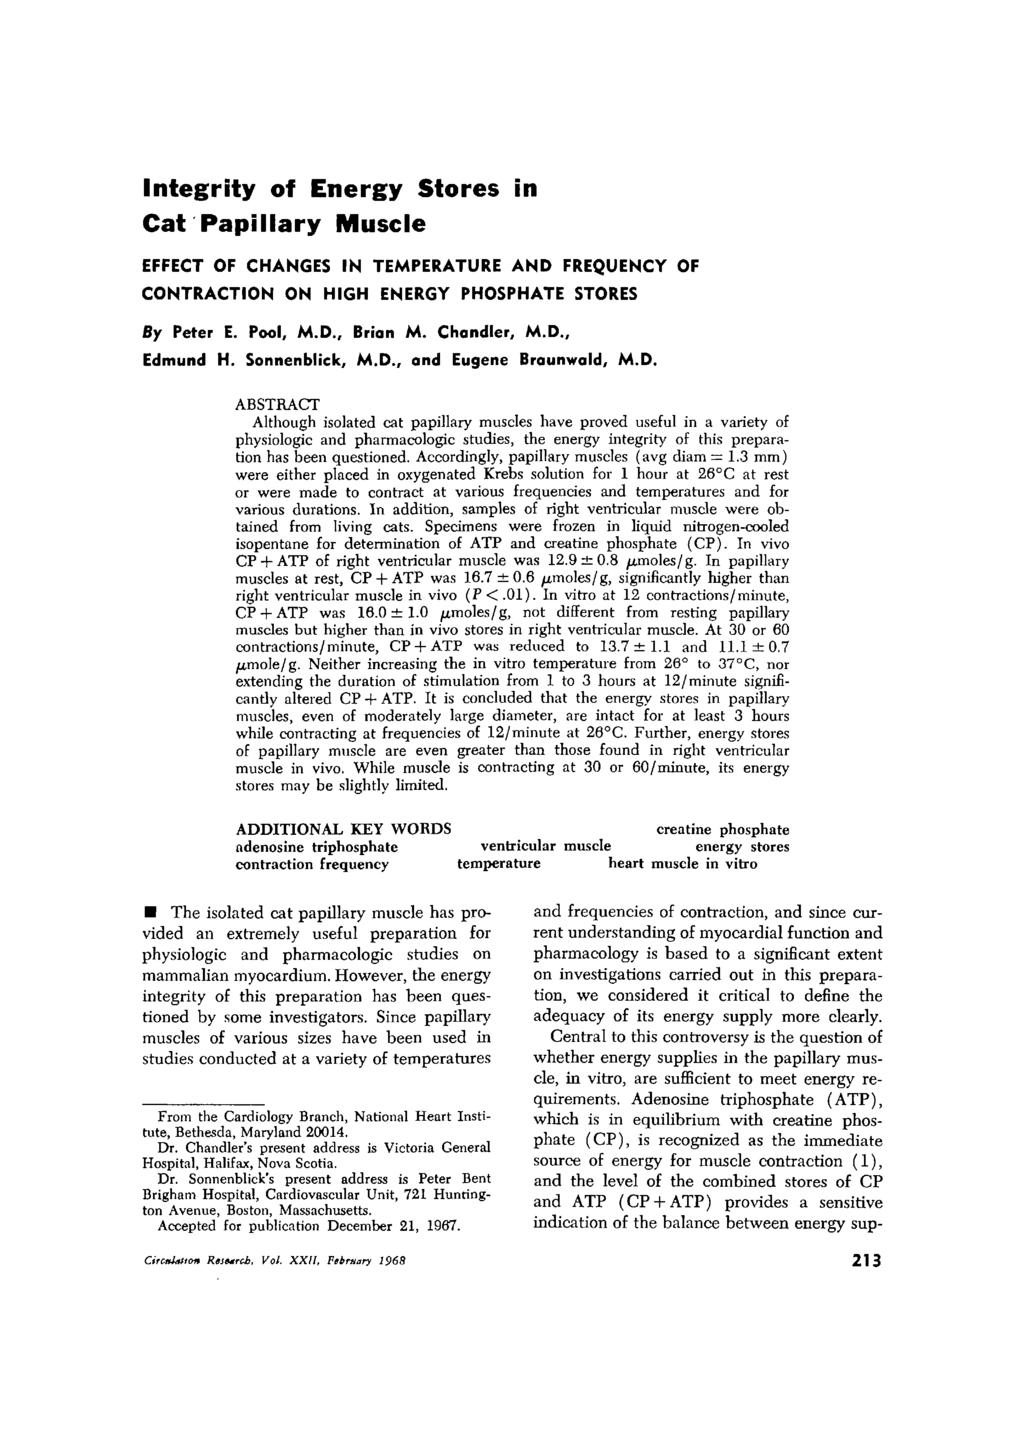 Integrity f Energy Stres in Cat Papillary Muscle EFFECT OF CHANGES IN TEMPERATURE AND FREQUENCY OF NTRACTION ON HIGH ENERGY PHOSPHATE STORES By Peter E. Pl, M.D., Brian M. Chandler, M.D., Edmund H.